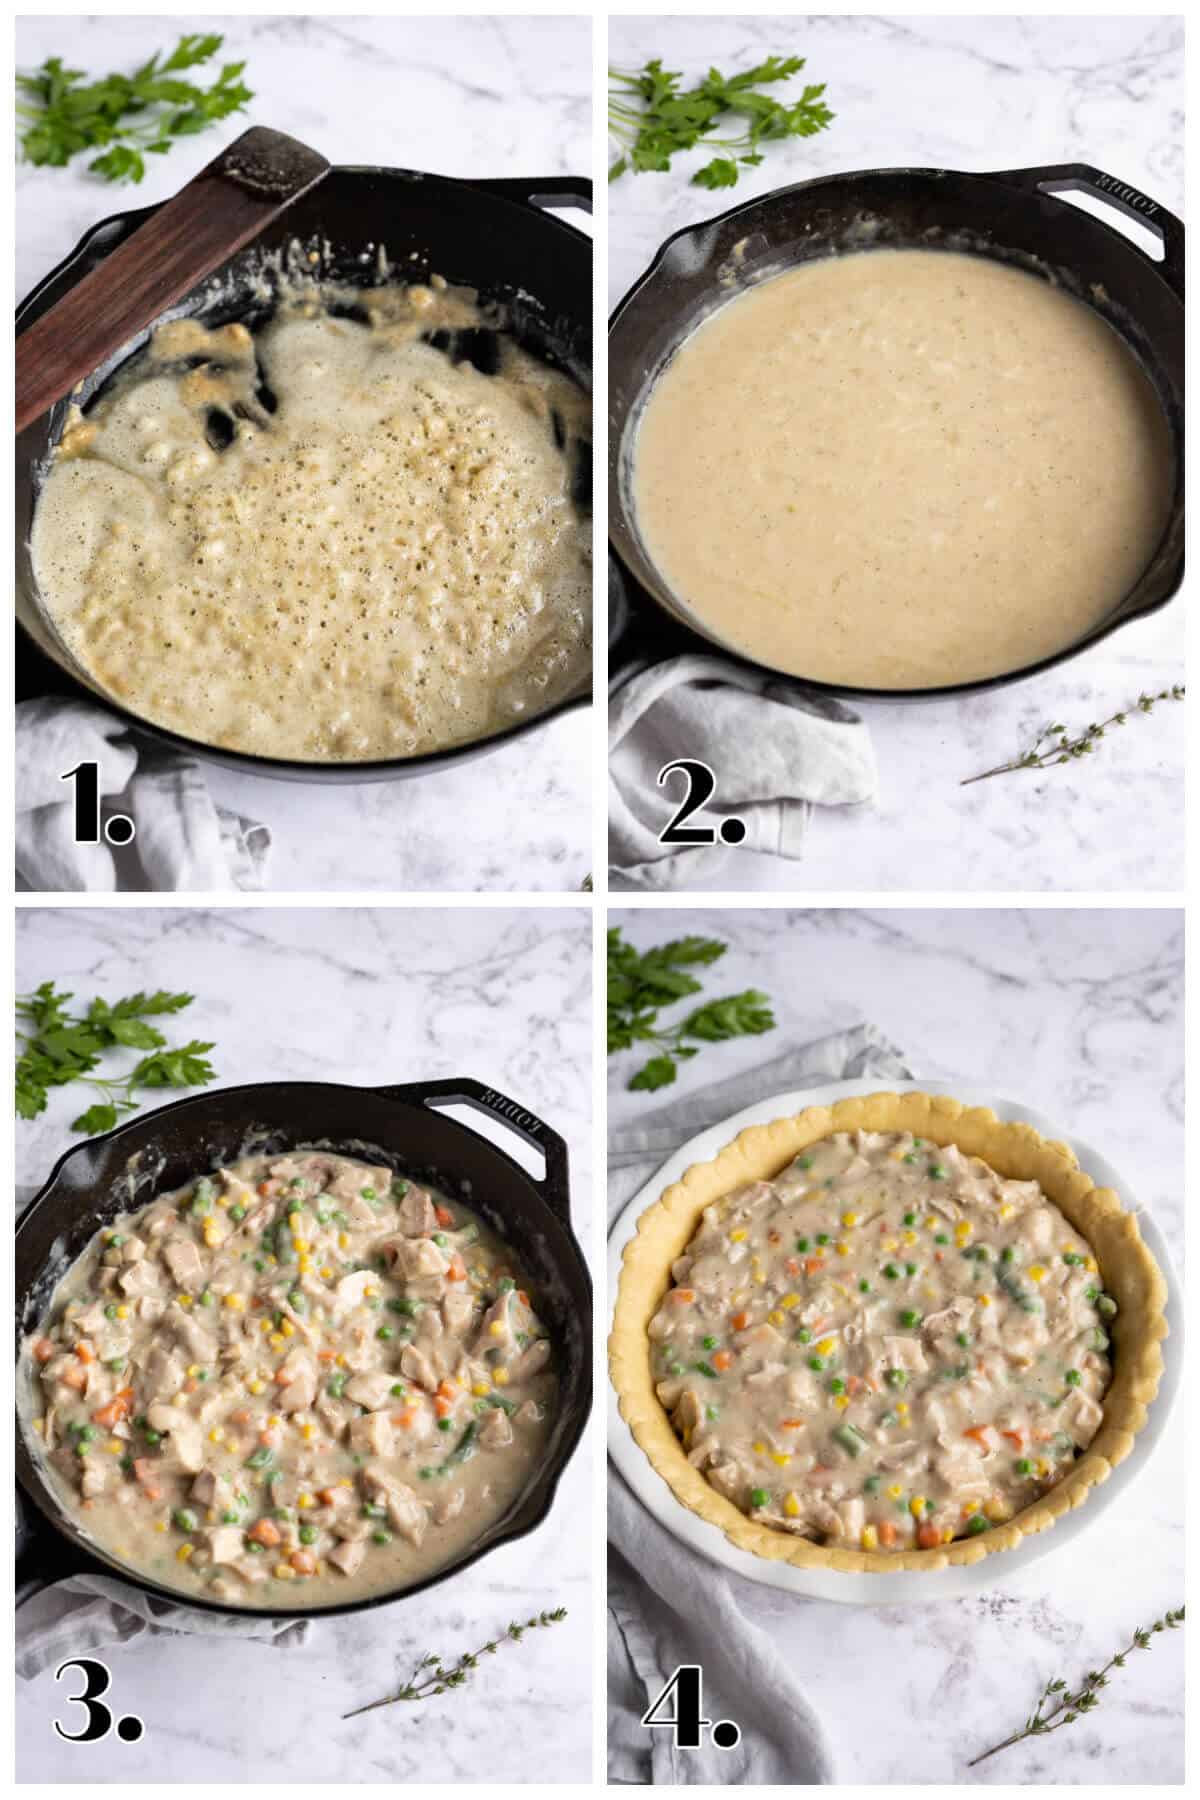 4 image collage showing the steps to make turkey pot pie filling from scratch.